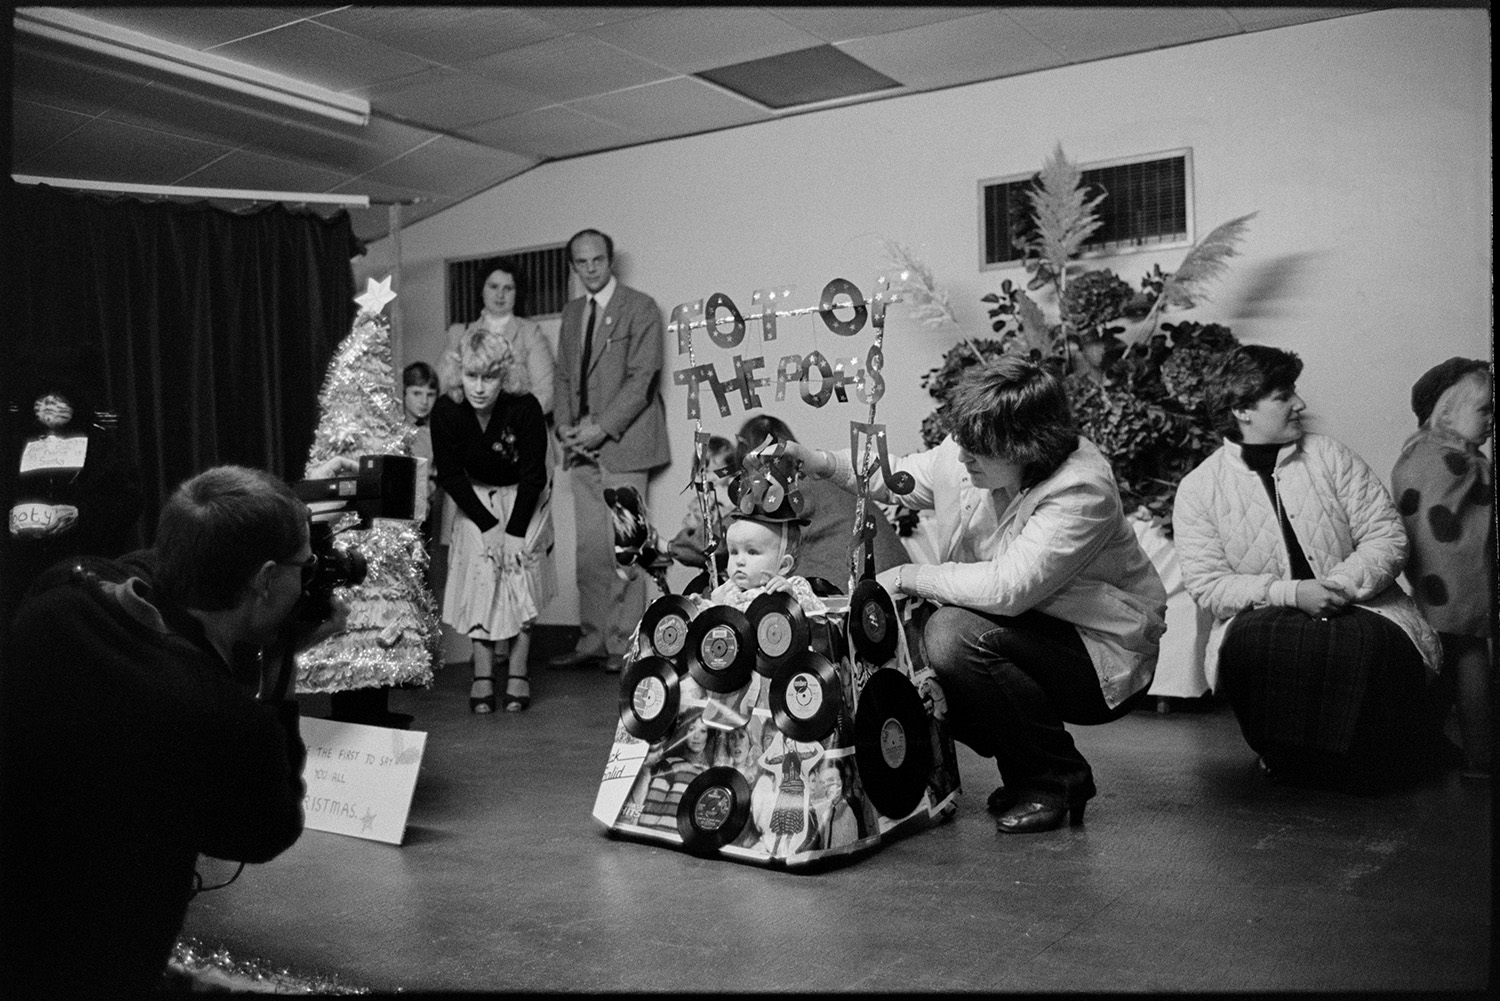 Village carnival, children's fancy dress competition in village hall. 
[A man taking photographs of entrants in a children's fancy dress competition for Dolton Carnival in Dolton Village Hall. He is photographing a toddler dressed as 'Tot of the Pops'.]